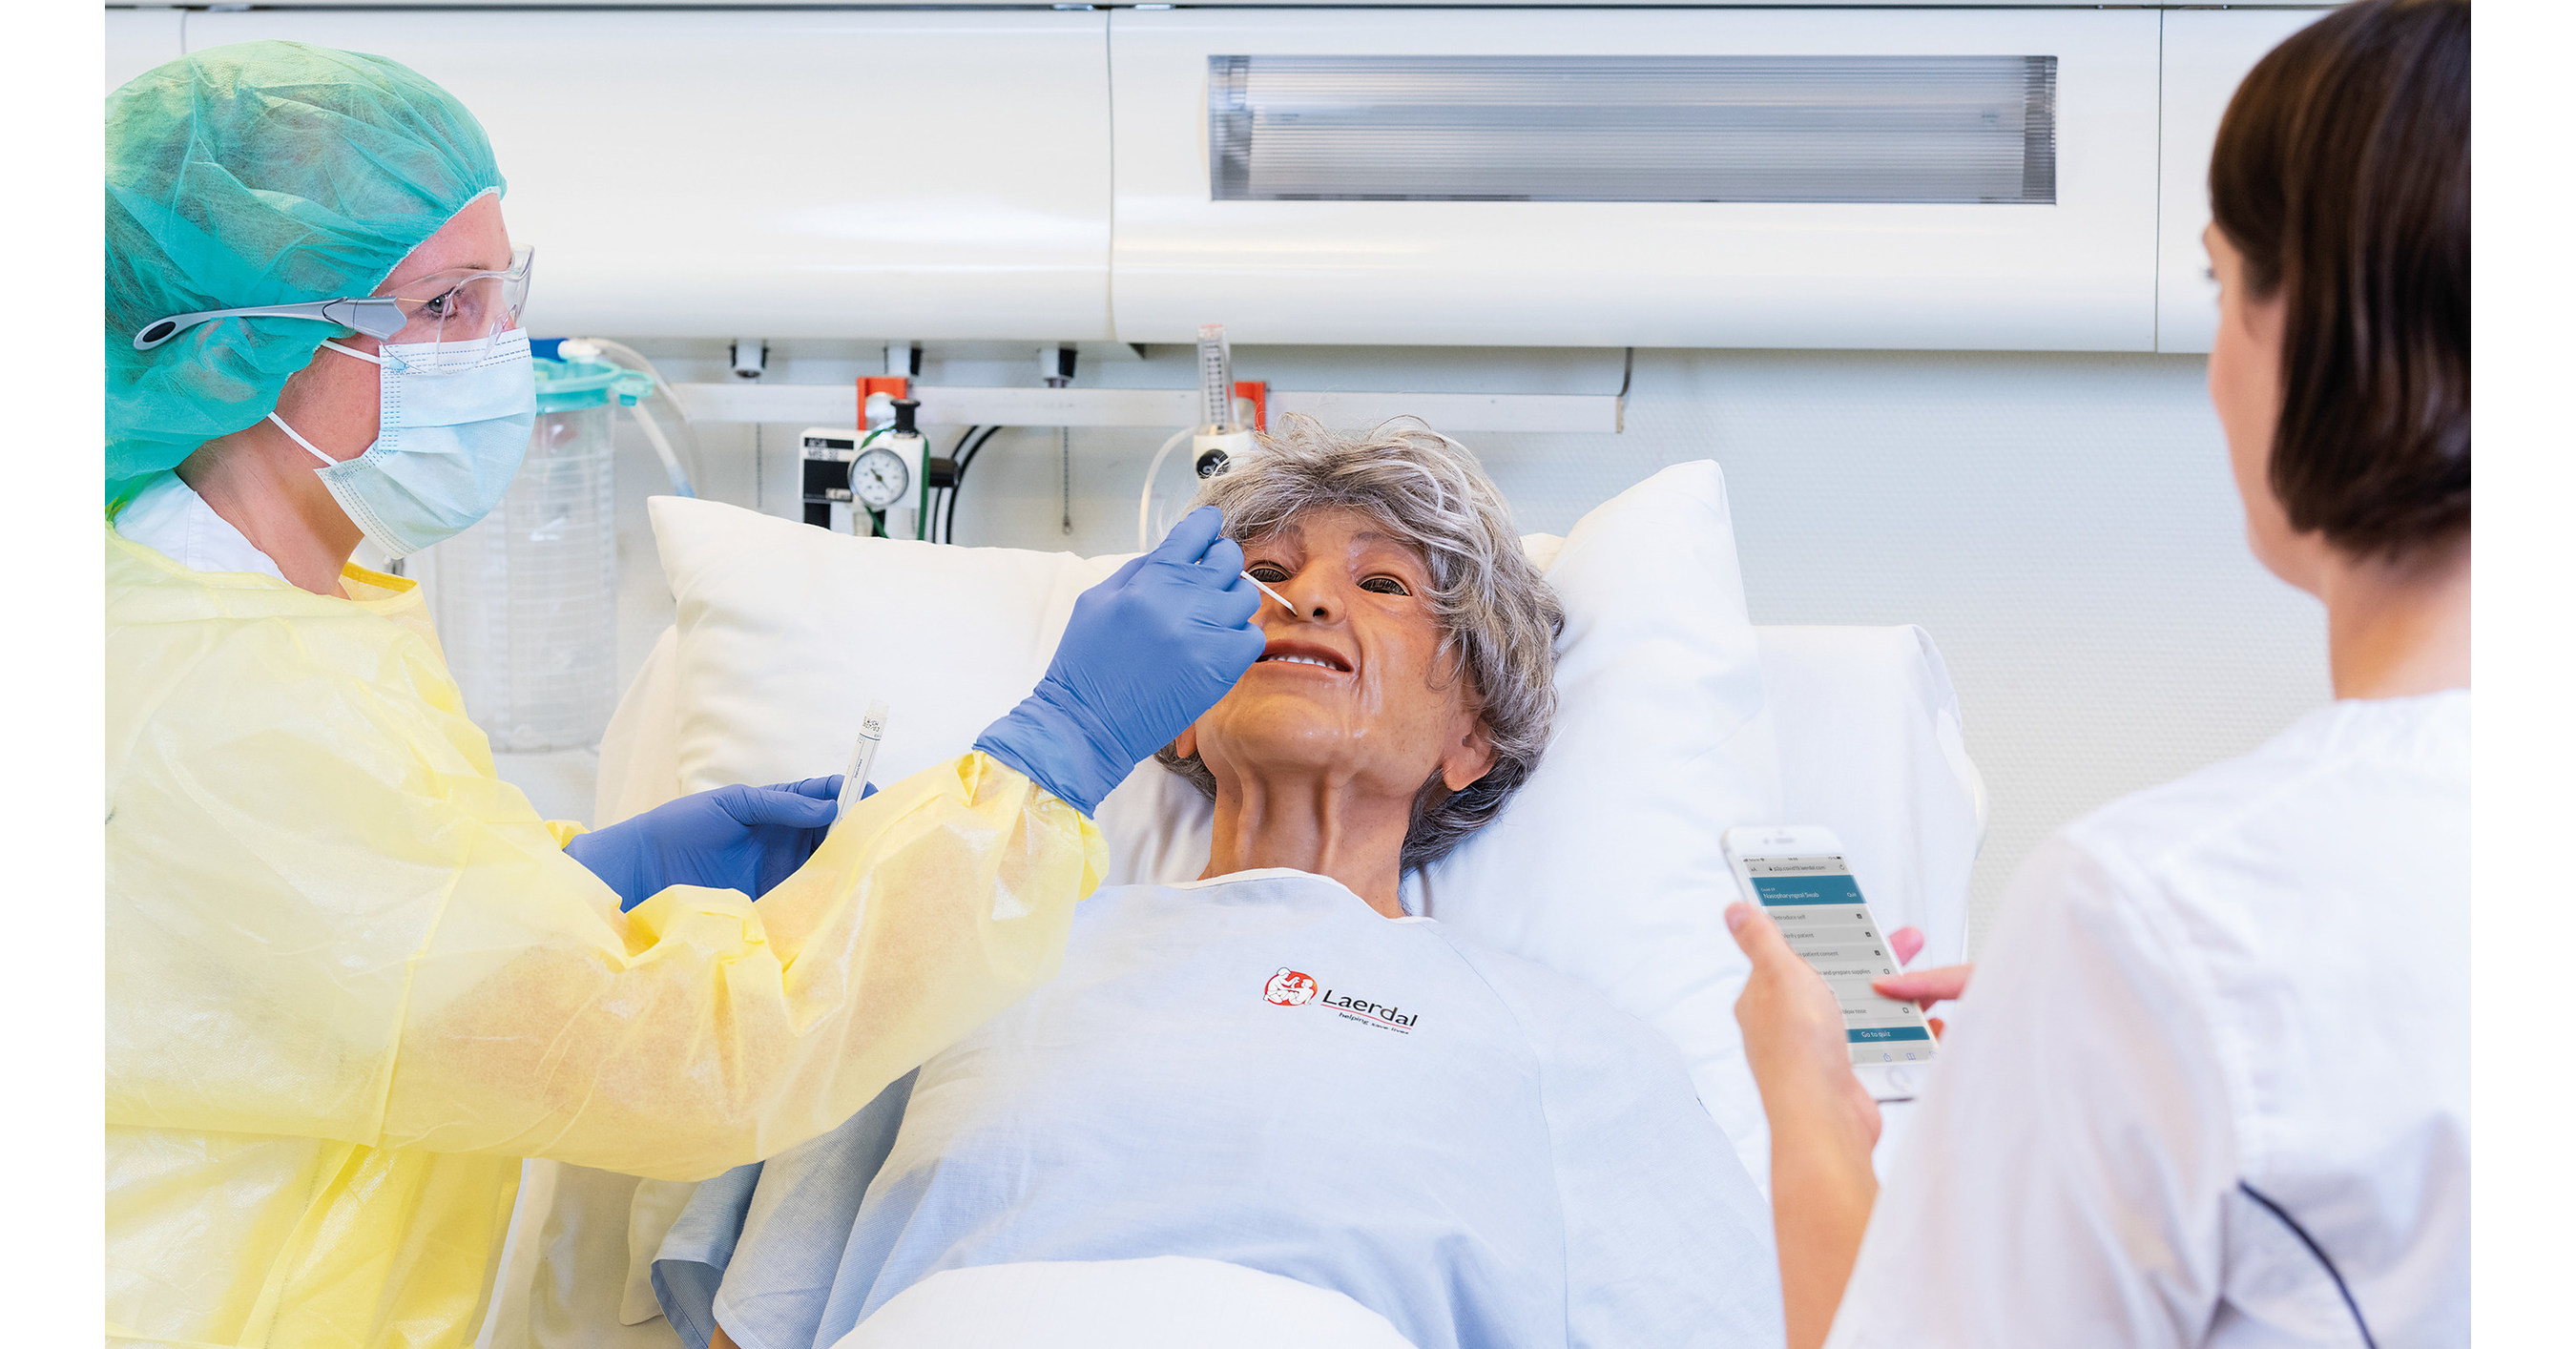 Laerdal Medical Introduces Simulation Solutions To Educate Without 8343